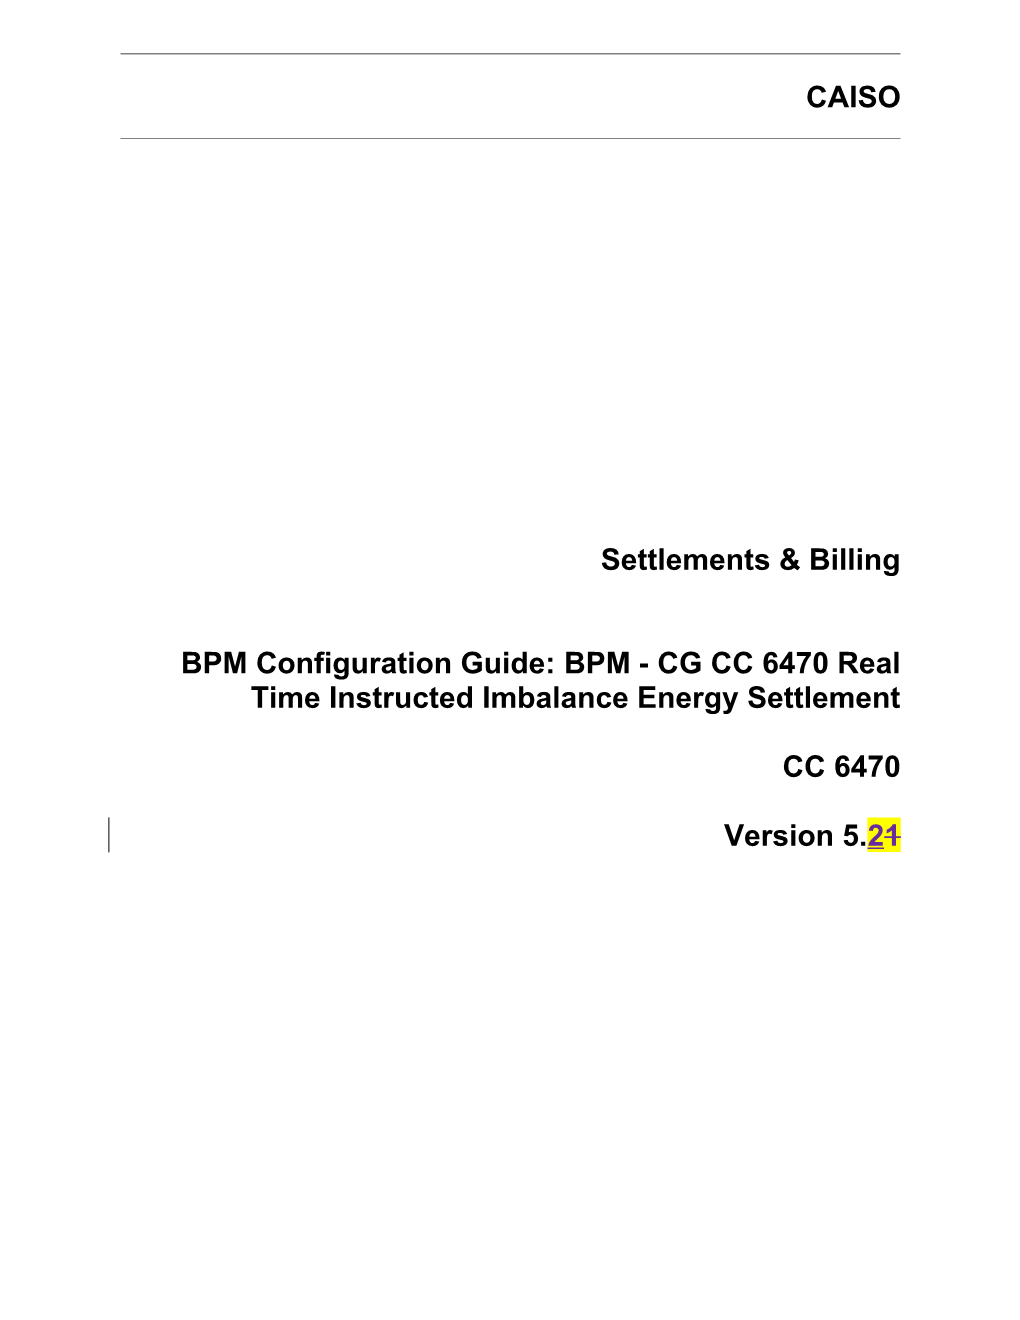 BPM - CG CC 6470 Real Time Instructed Imbalance Energy Settlement